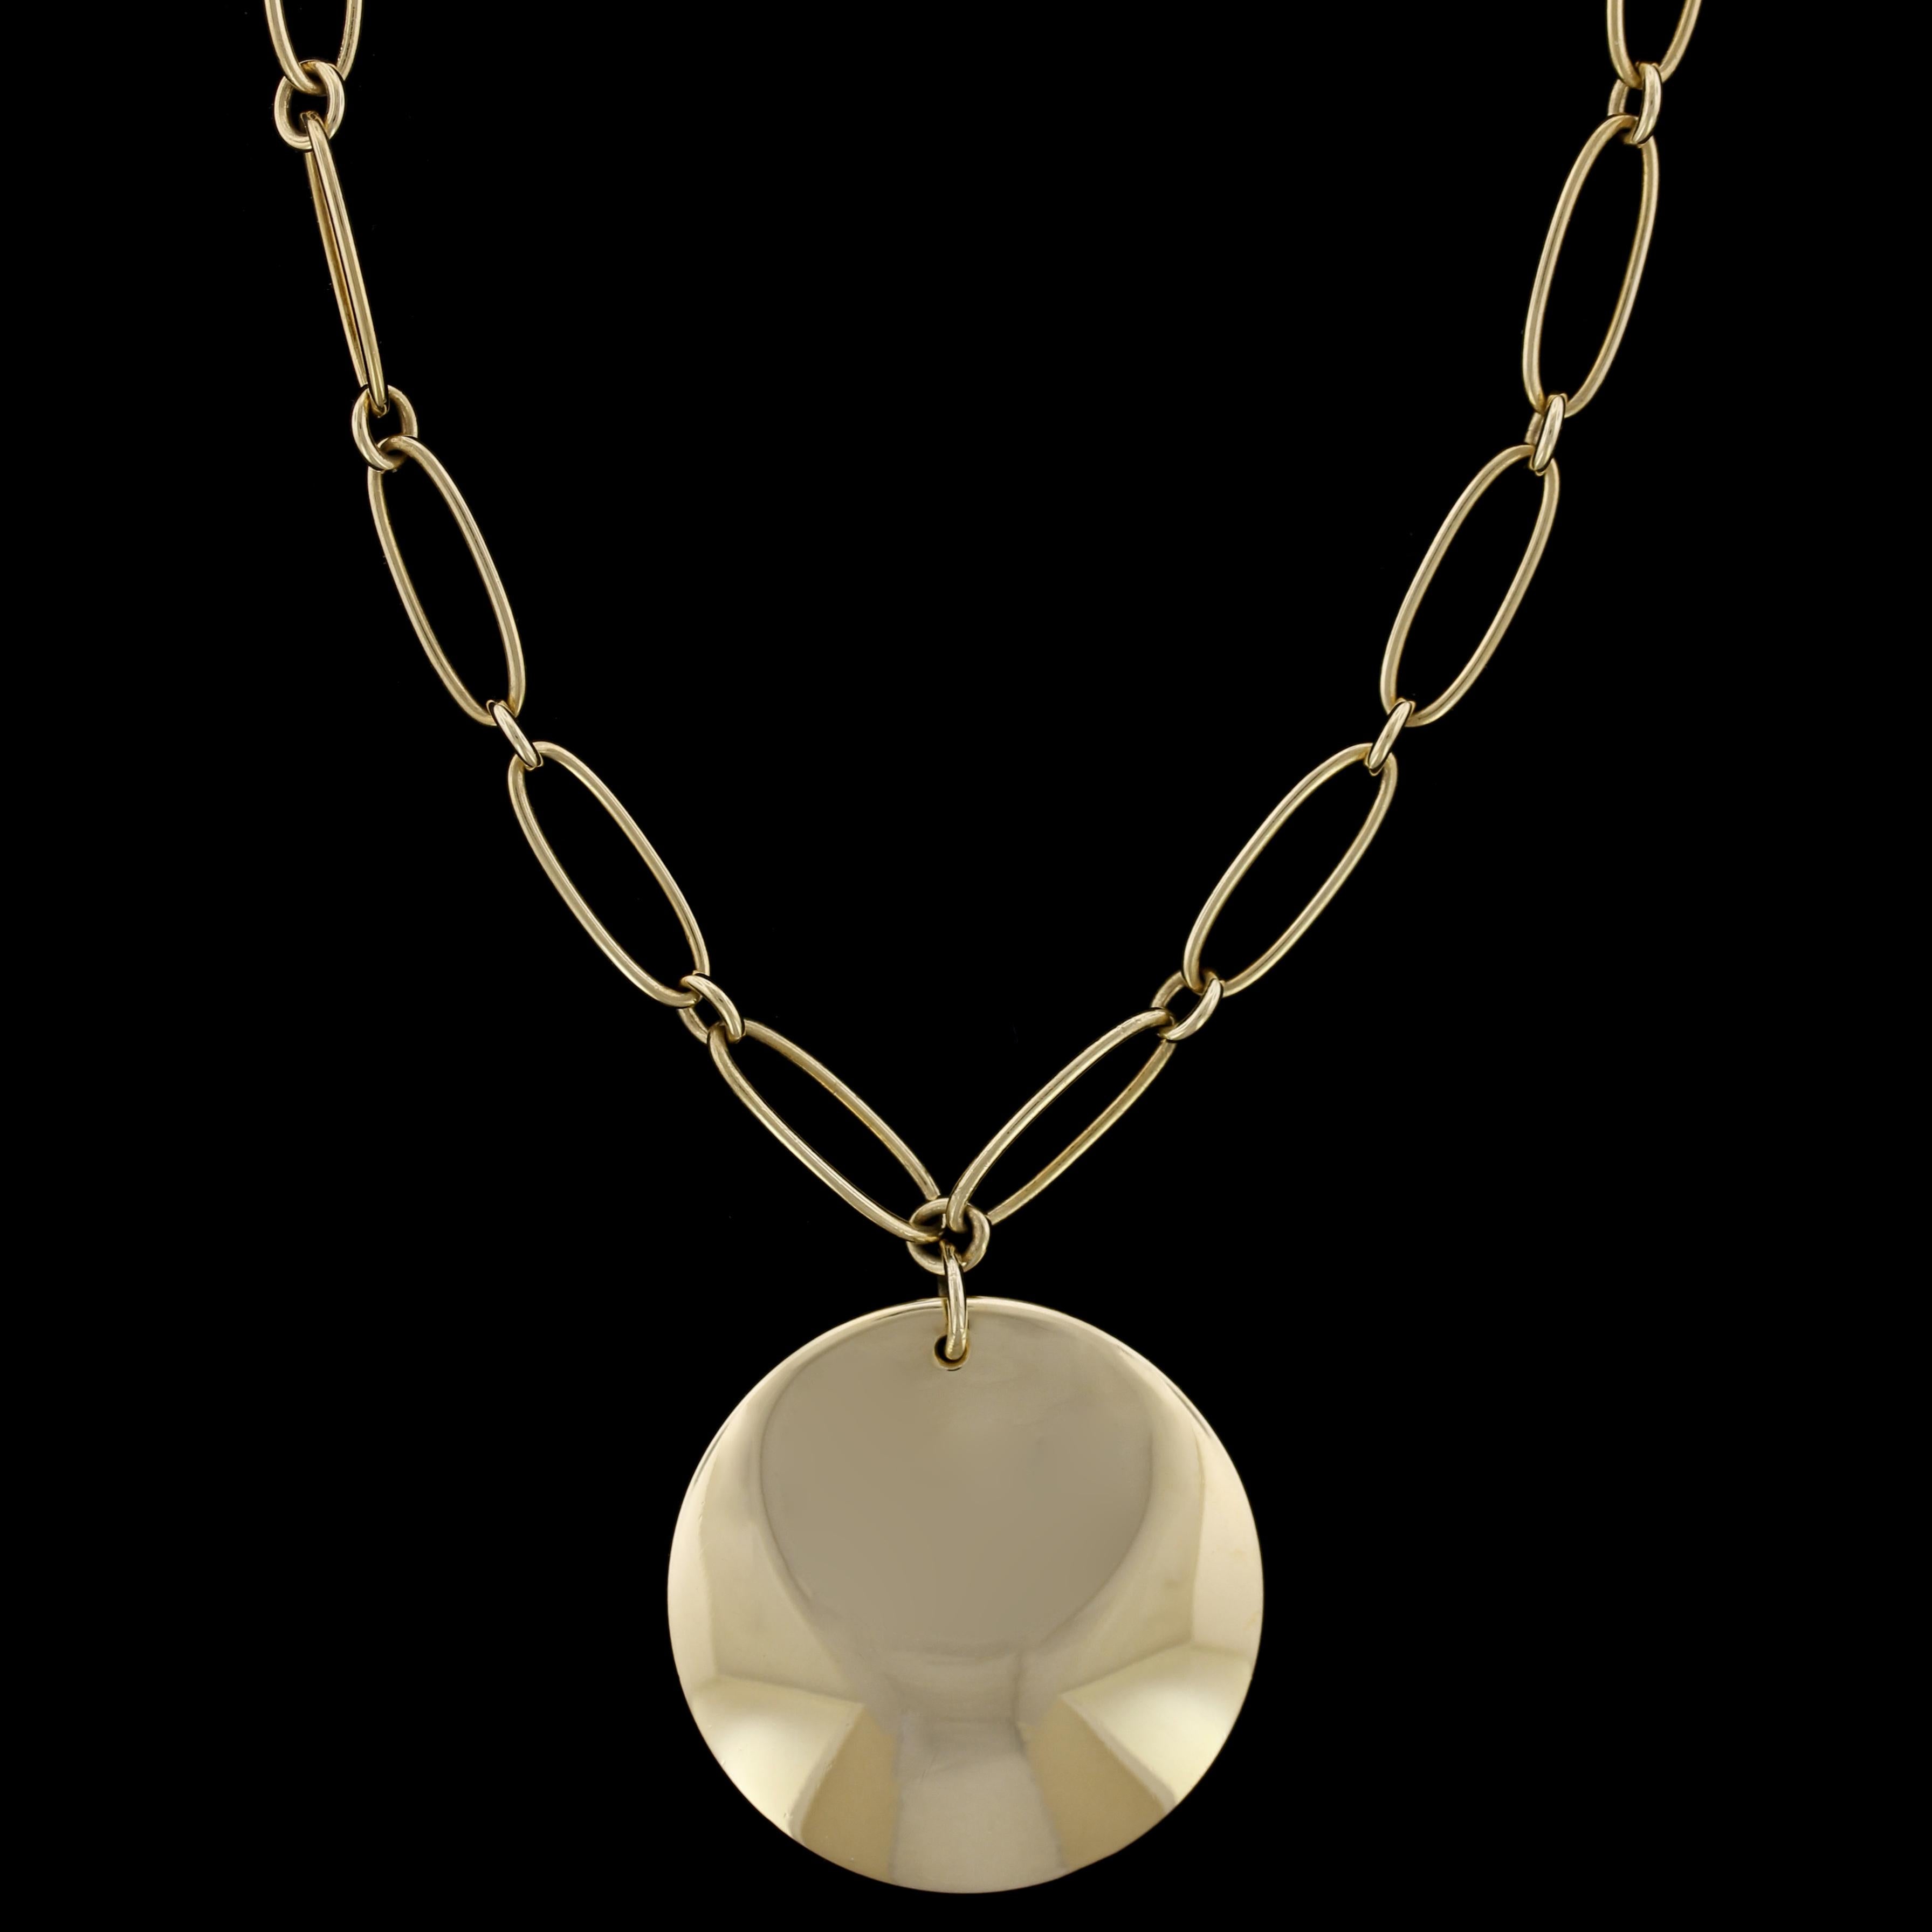 Tiffany & Co. Elsa Peretti 18K Yellow Gold Circle Pendant Necklace. The circle pendant
measures 30.00mm., suspended from a 16